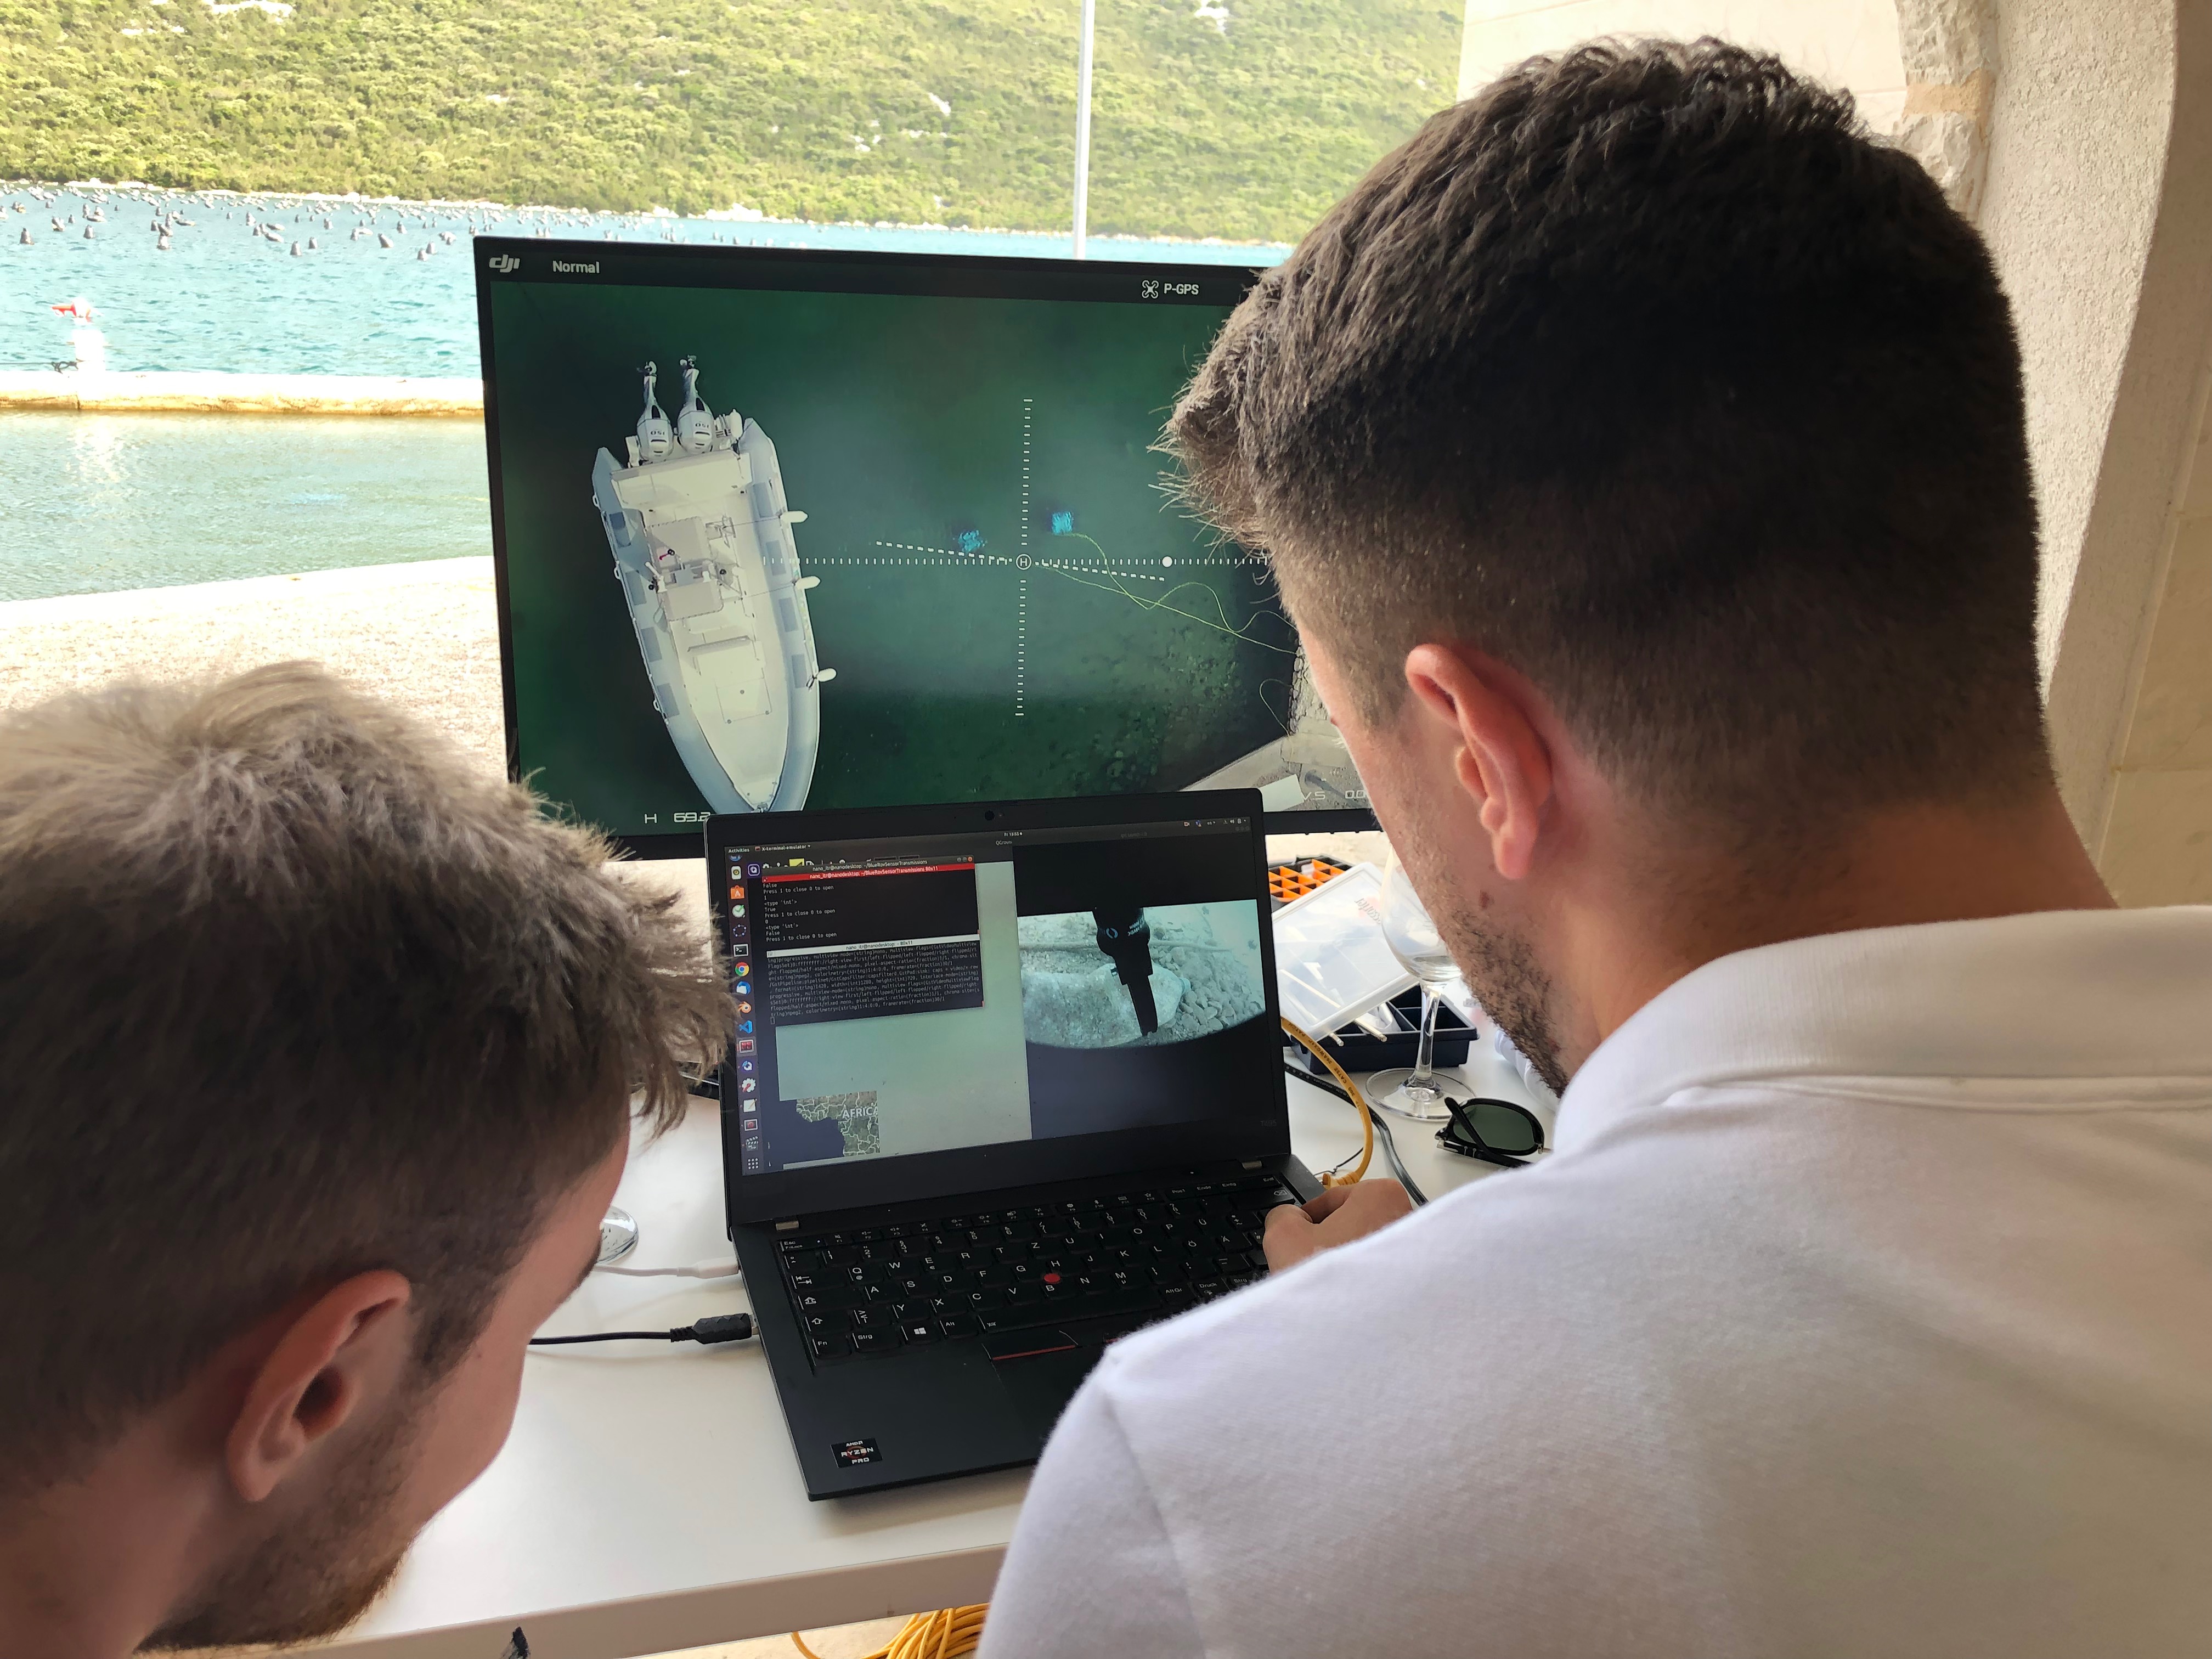 The research group of the SeaClear project observes the underwater activities of the robot on the monitor.